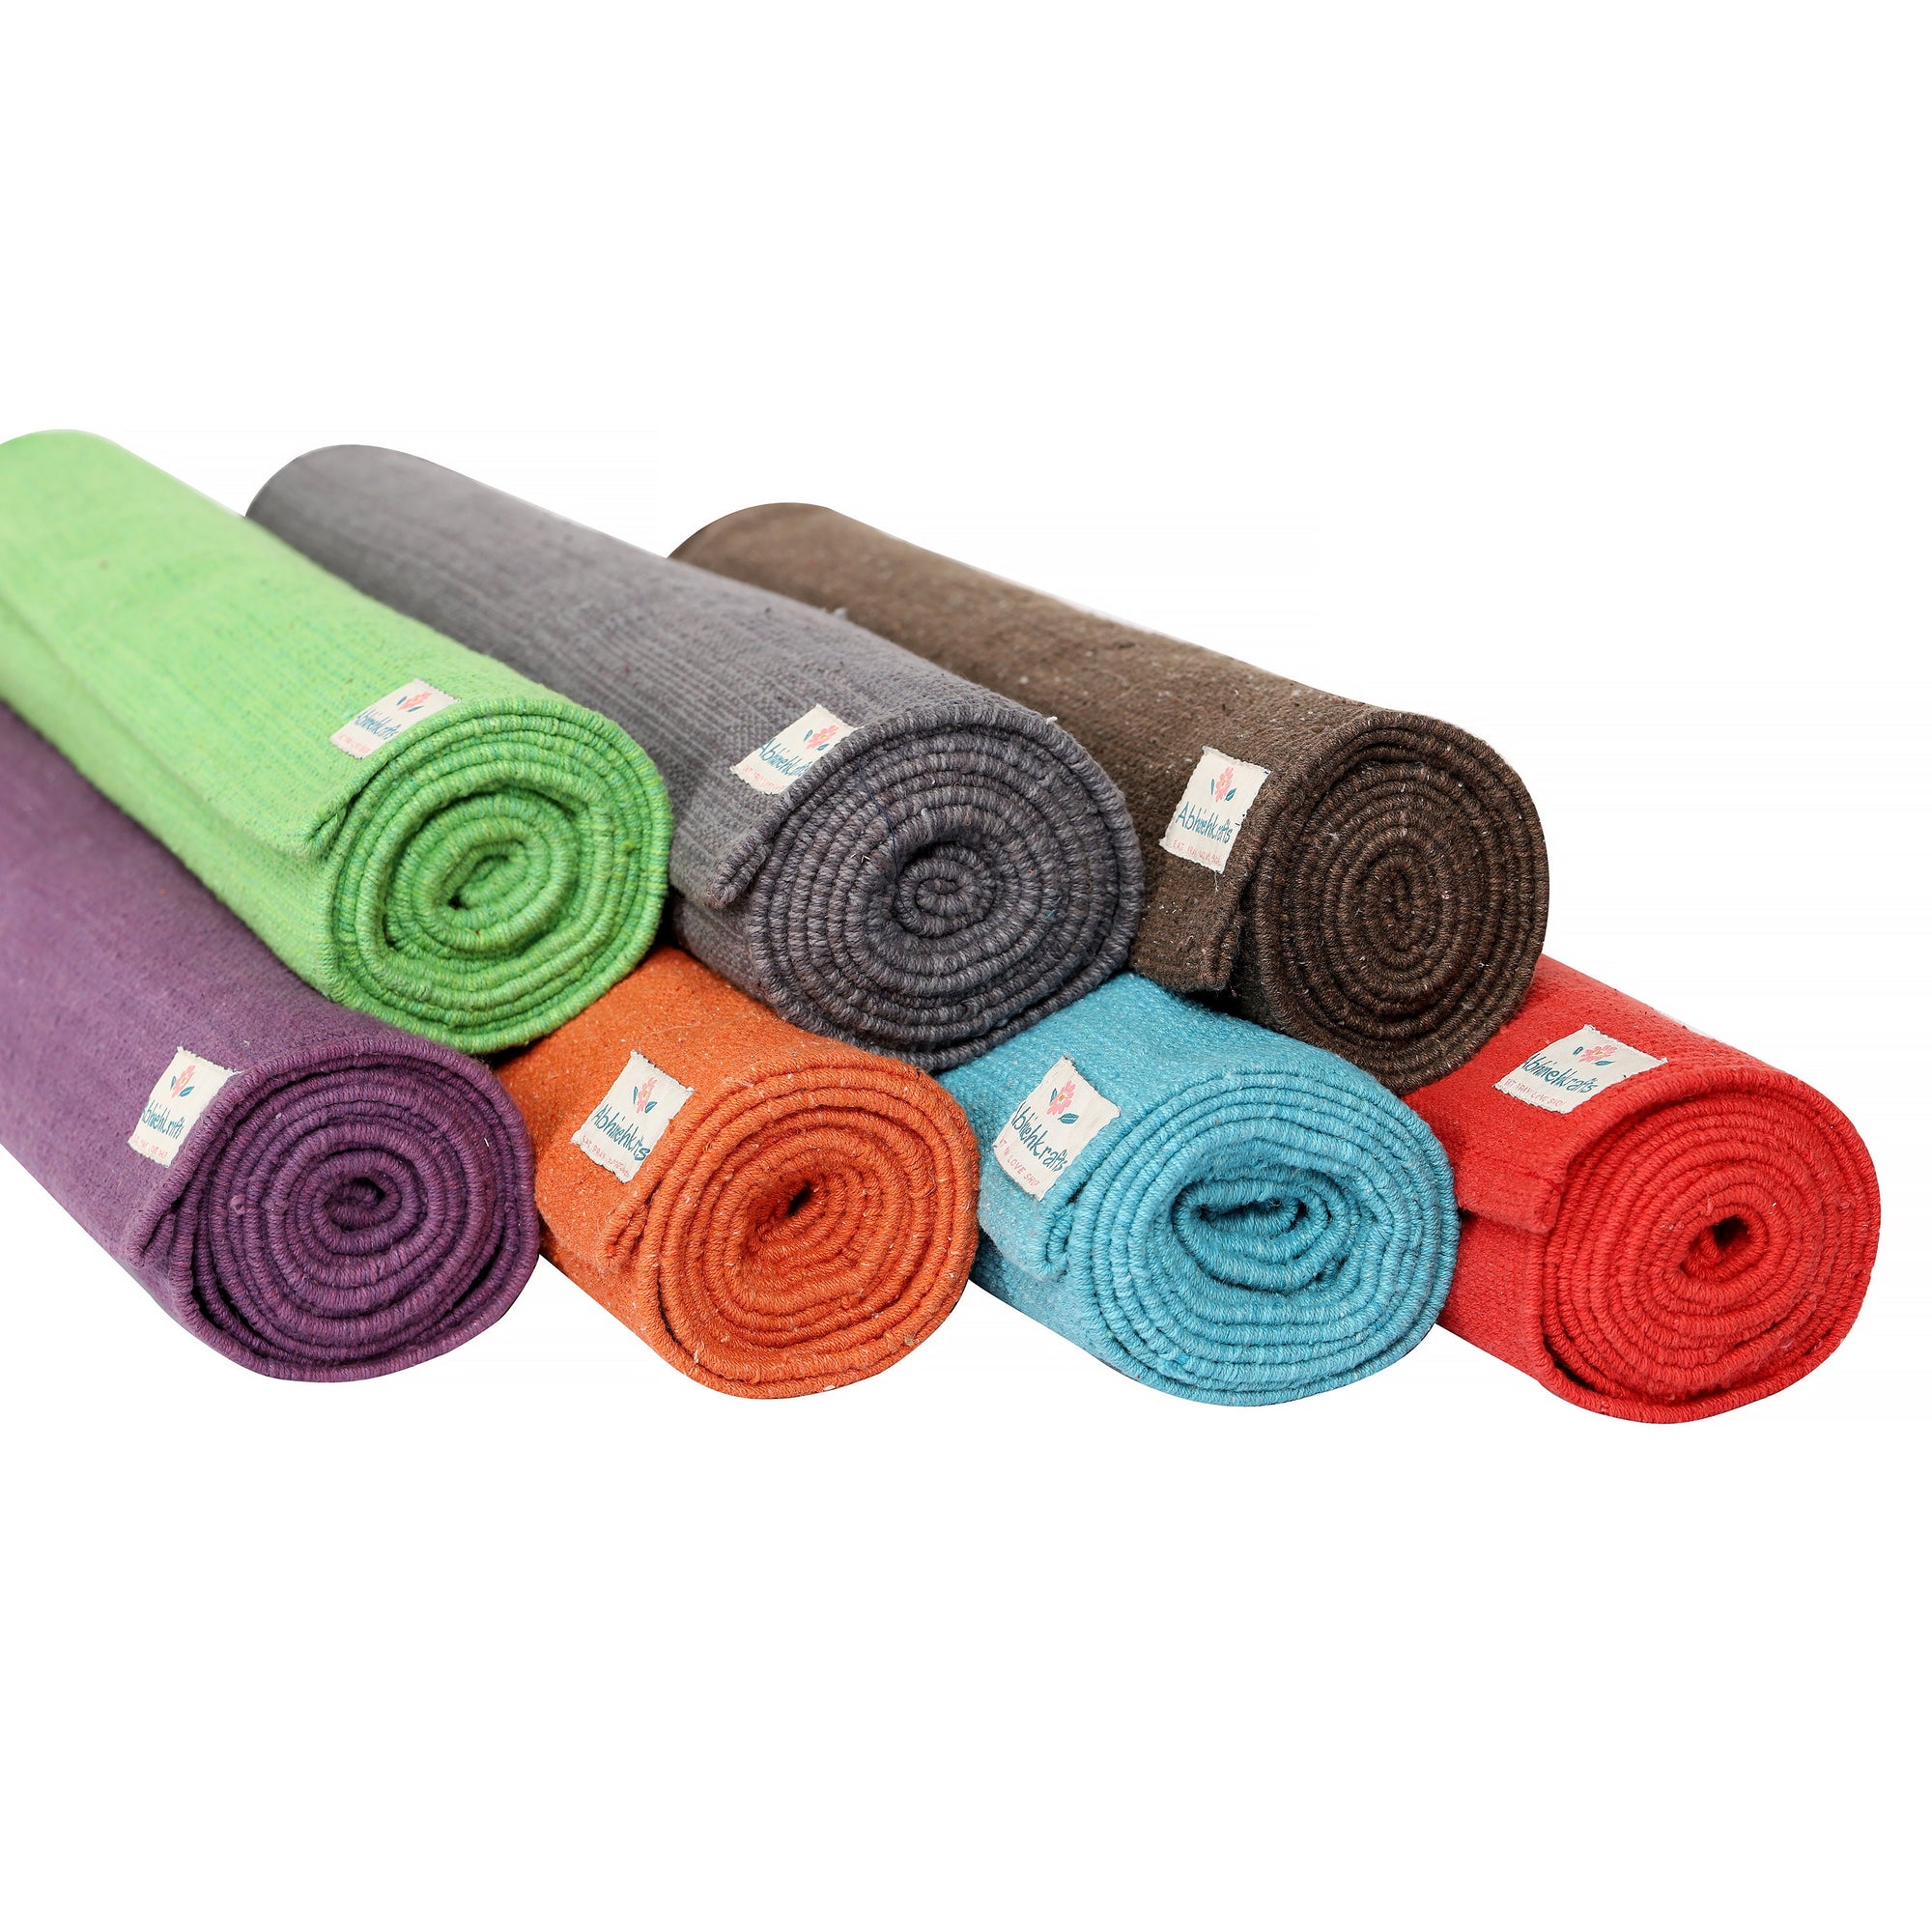 KD Cotton Yoga Mat Hand Woven Yoga Mat Eco Freindly Organic Handloom Mat  Supreme Heavy Quality with Carry Strap- 24 x 72 Exercise Mat